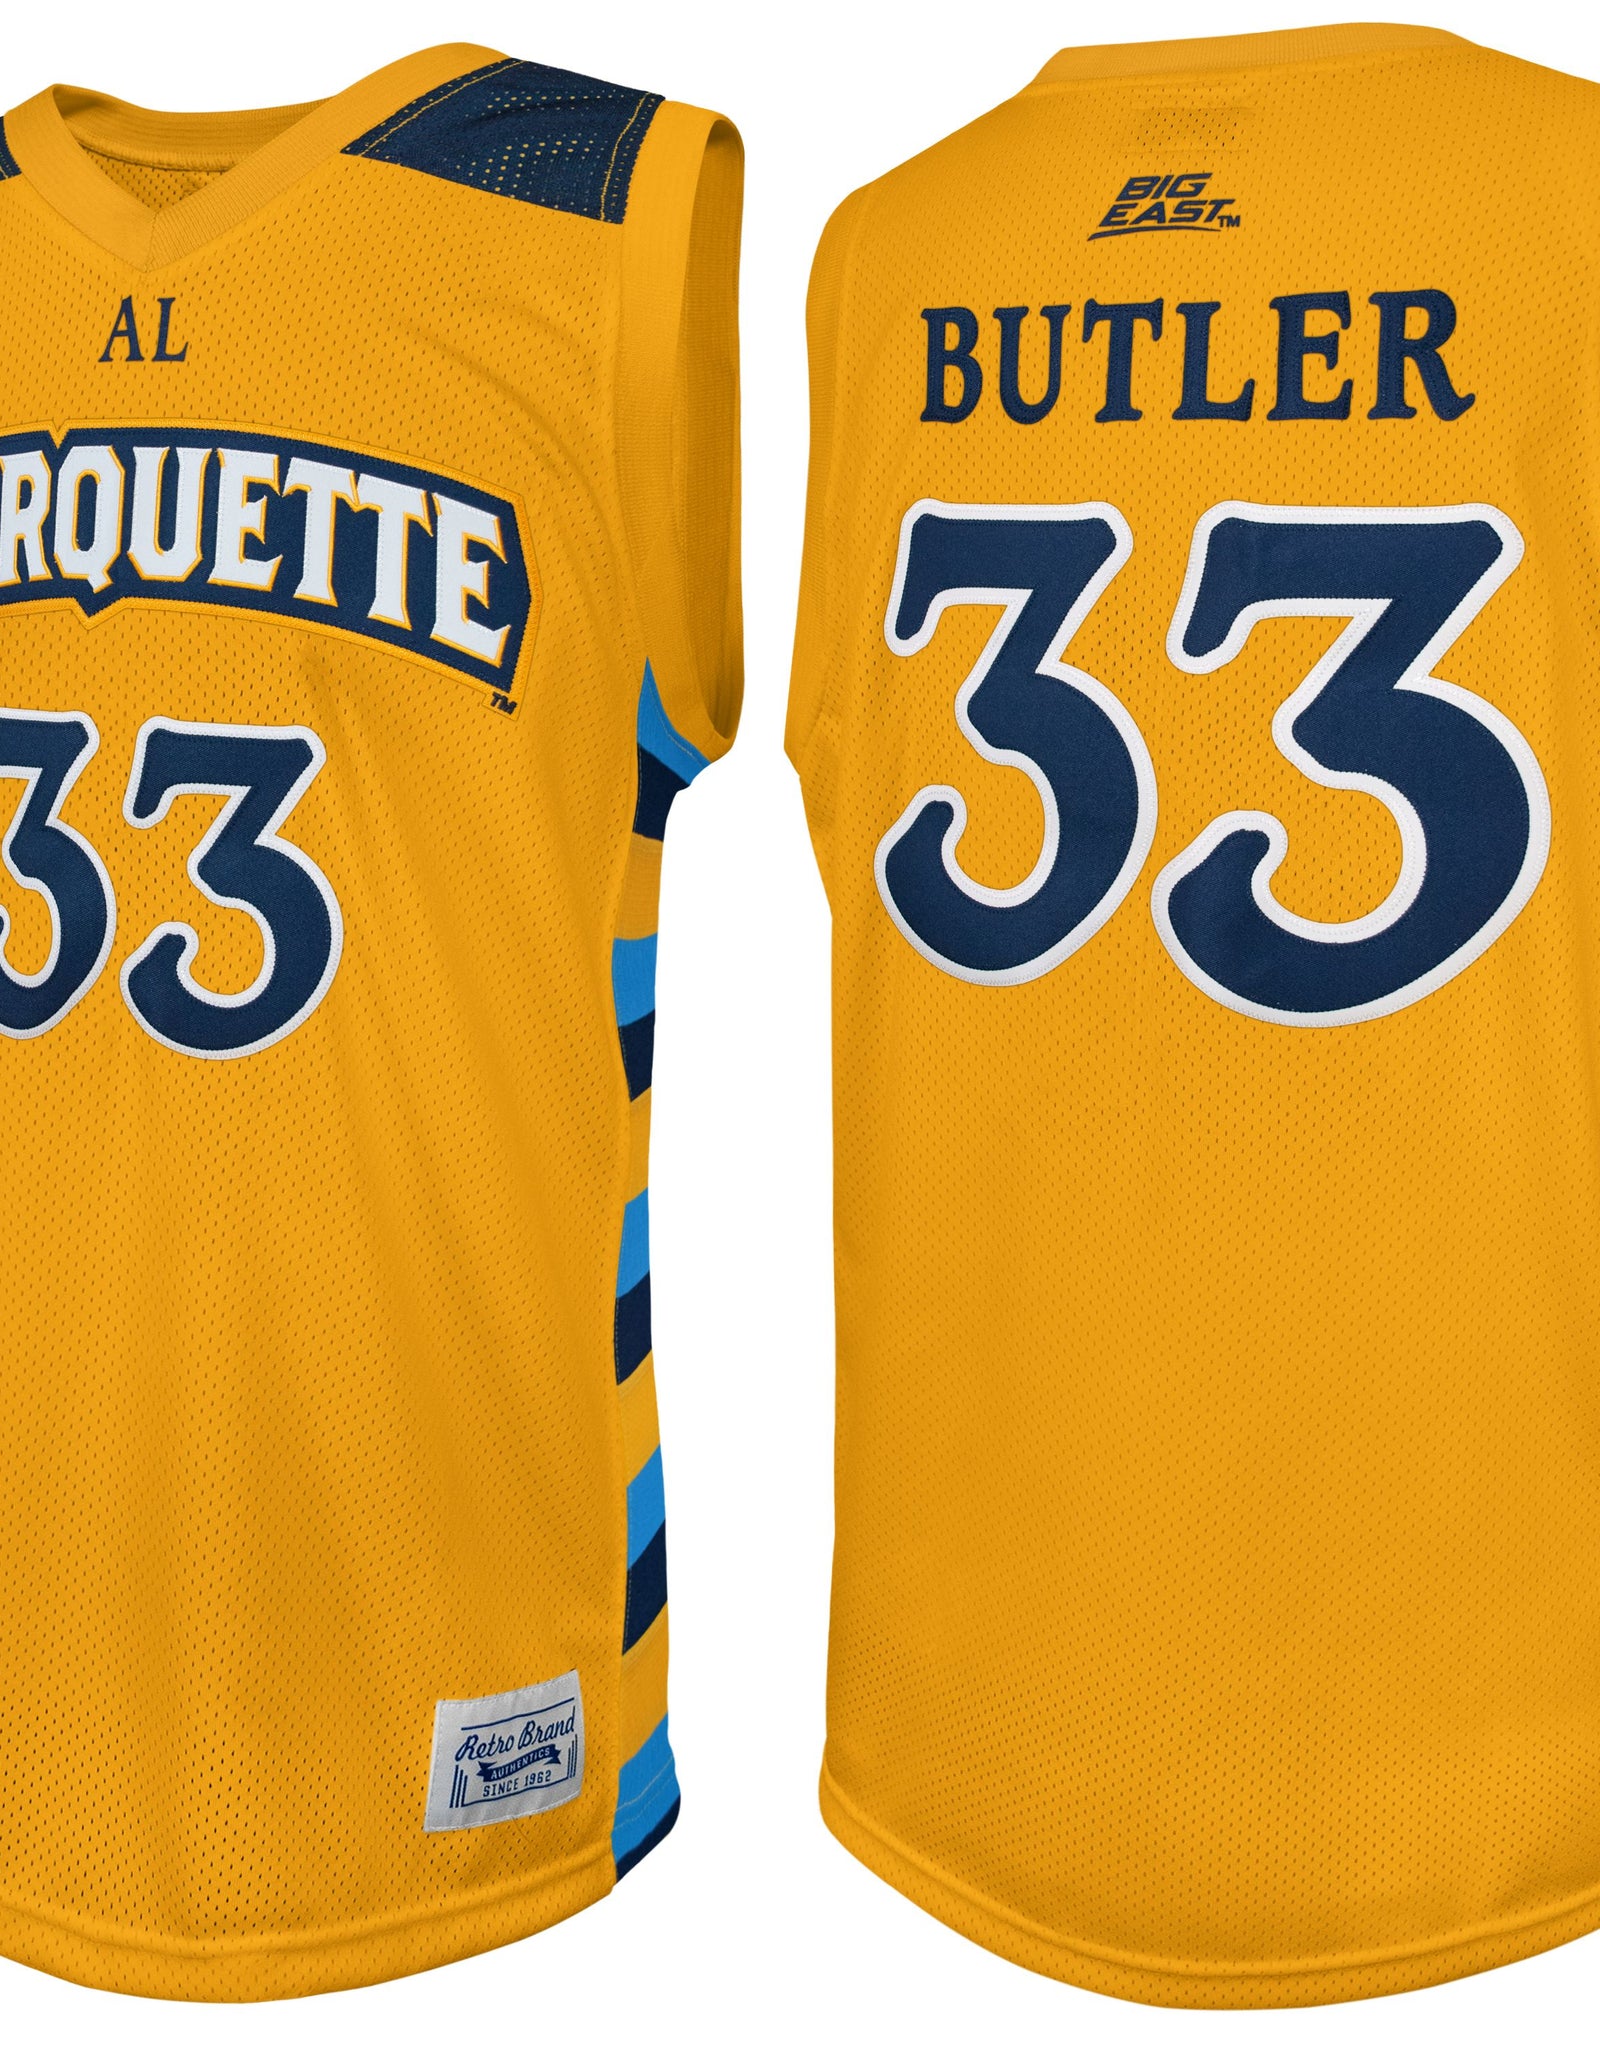 Marquette Golden Eagles Jimmy Butler Throwback Jersey